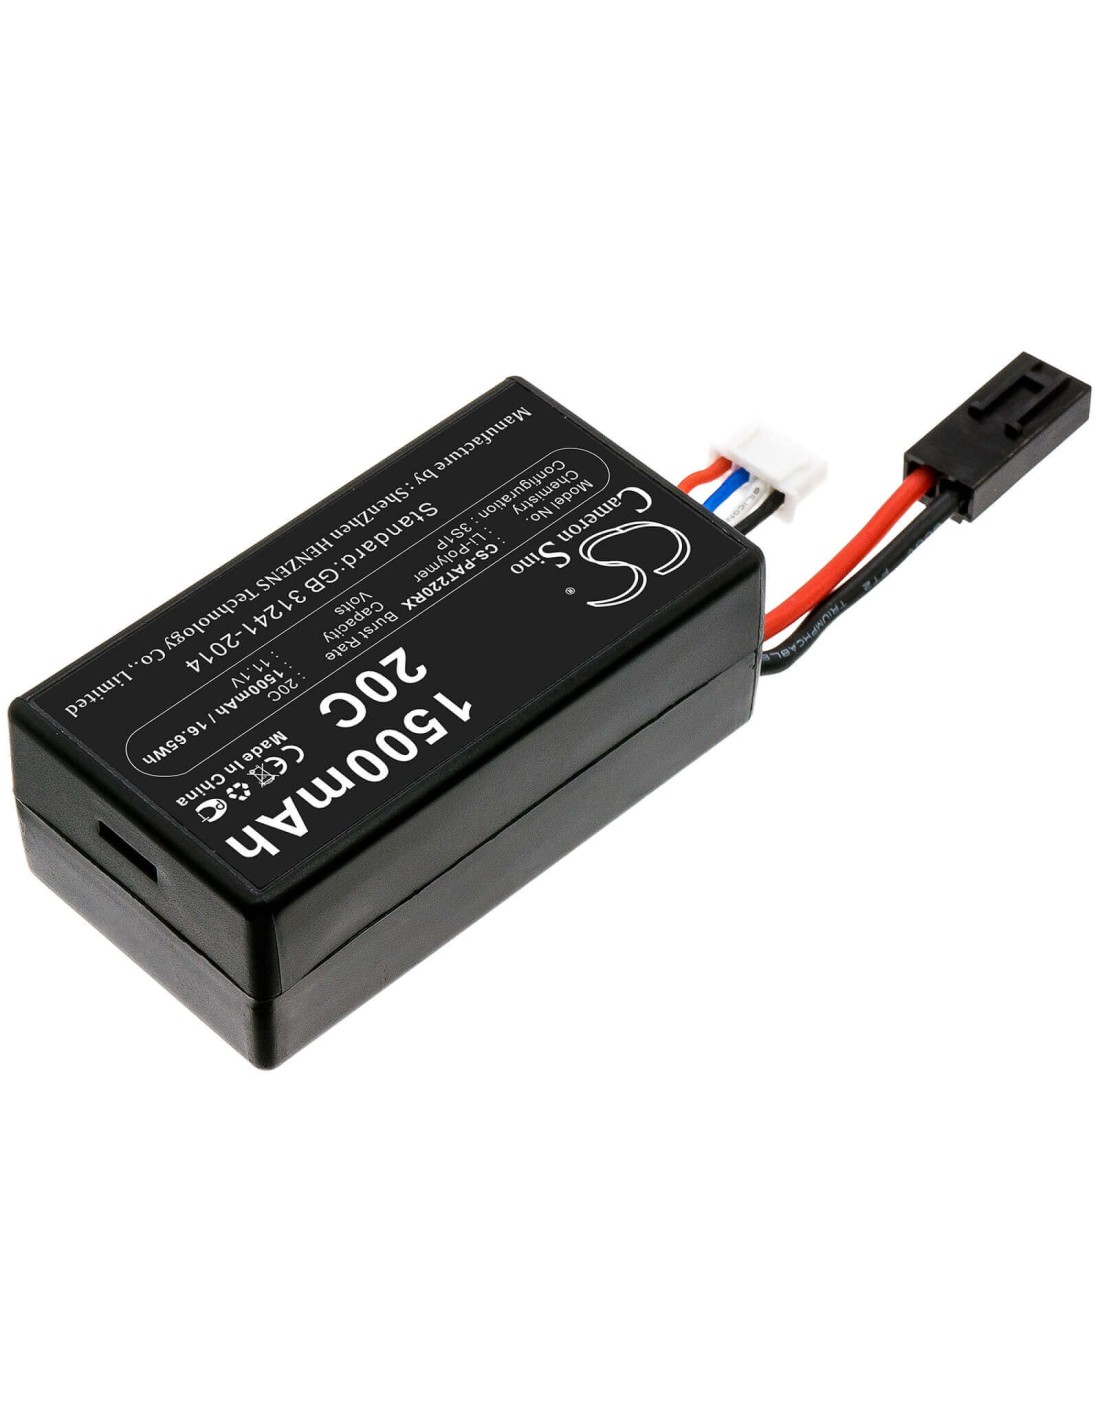 Battery for Parrot, Ar.drone 2.0, Note: Double Plug 11.1V, 1500mAh - 16.65Wh